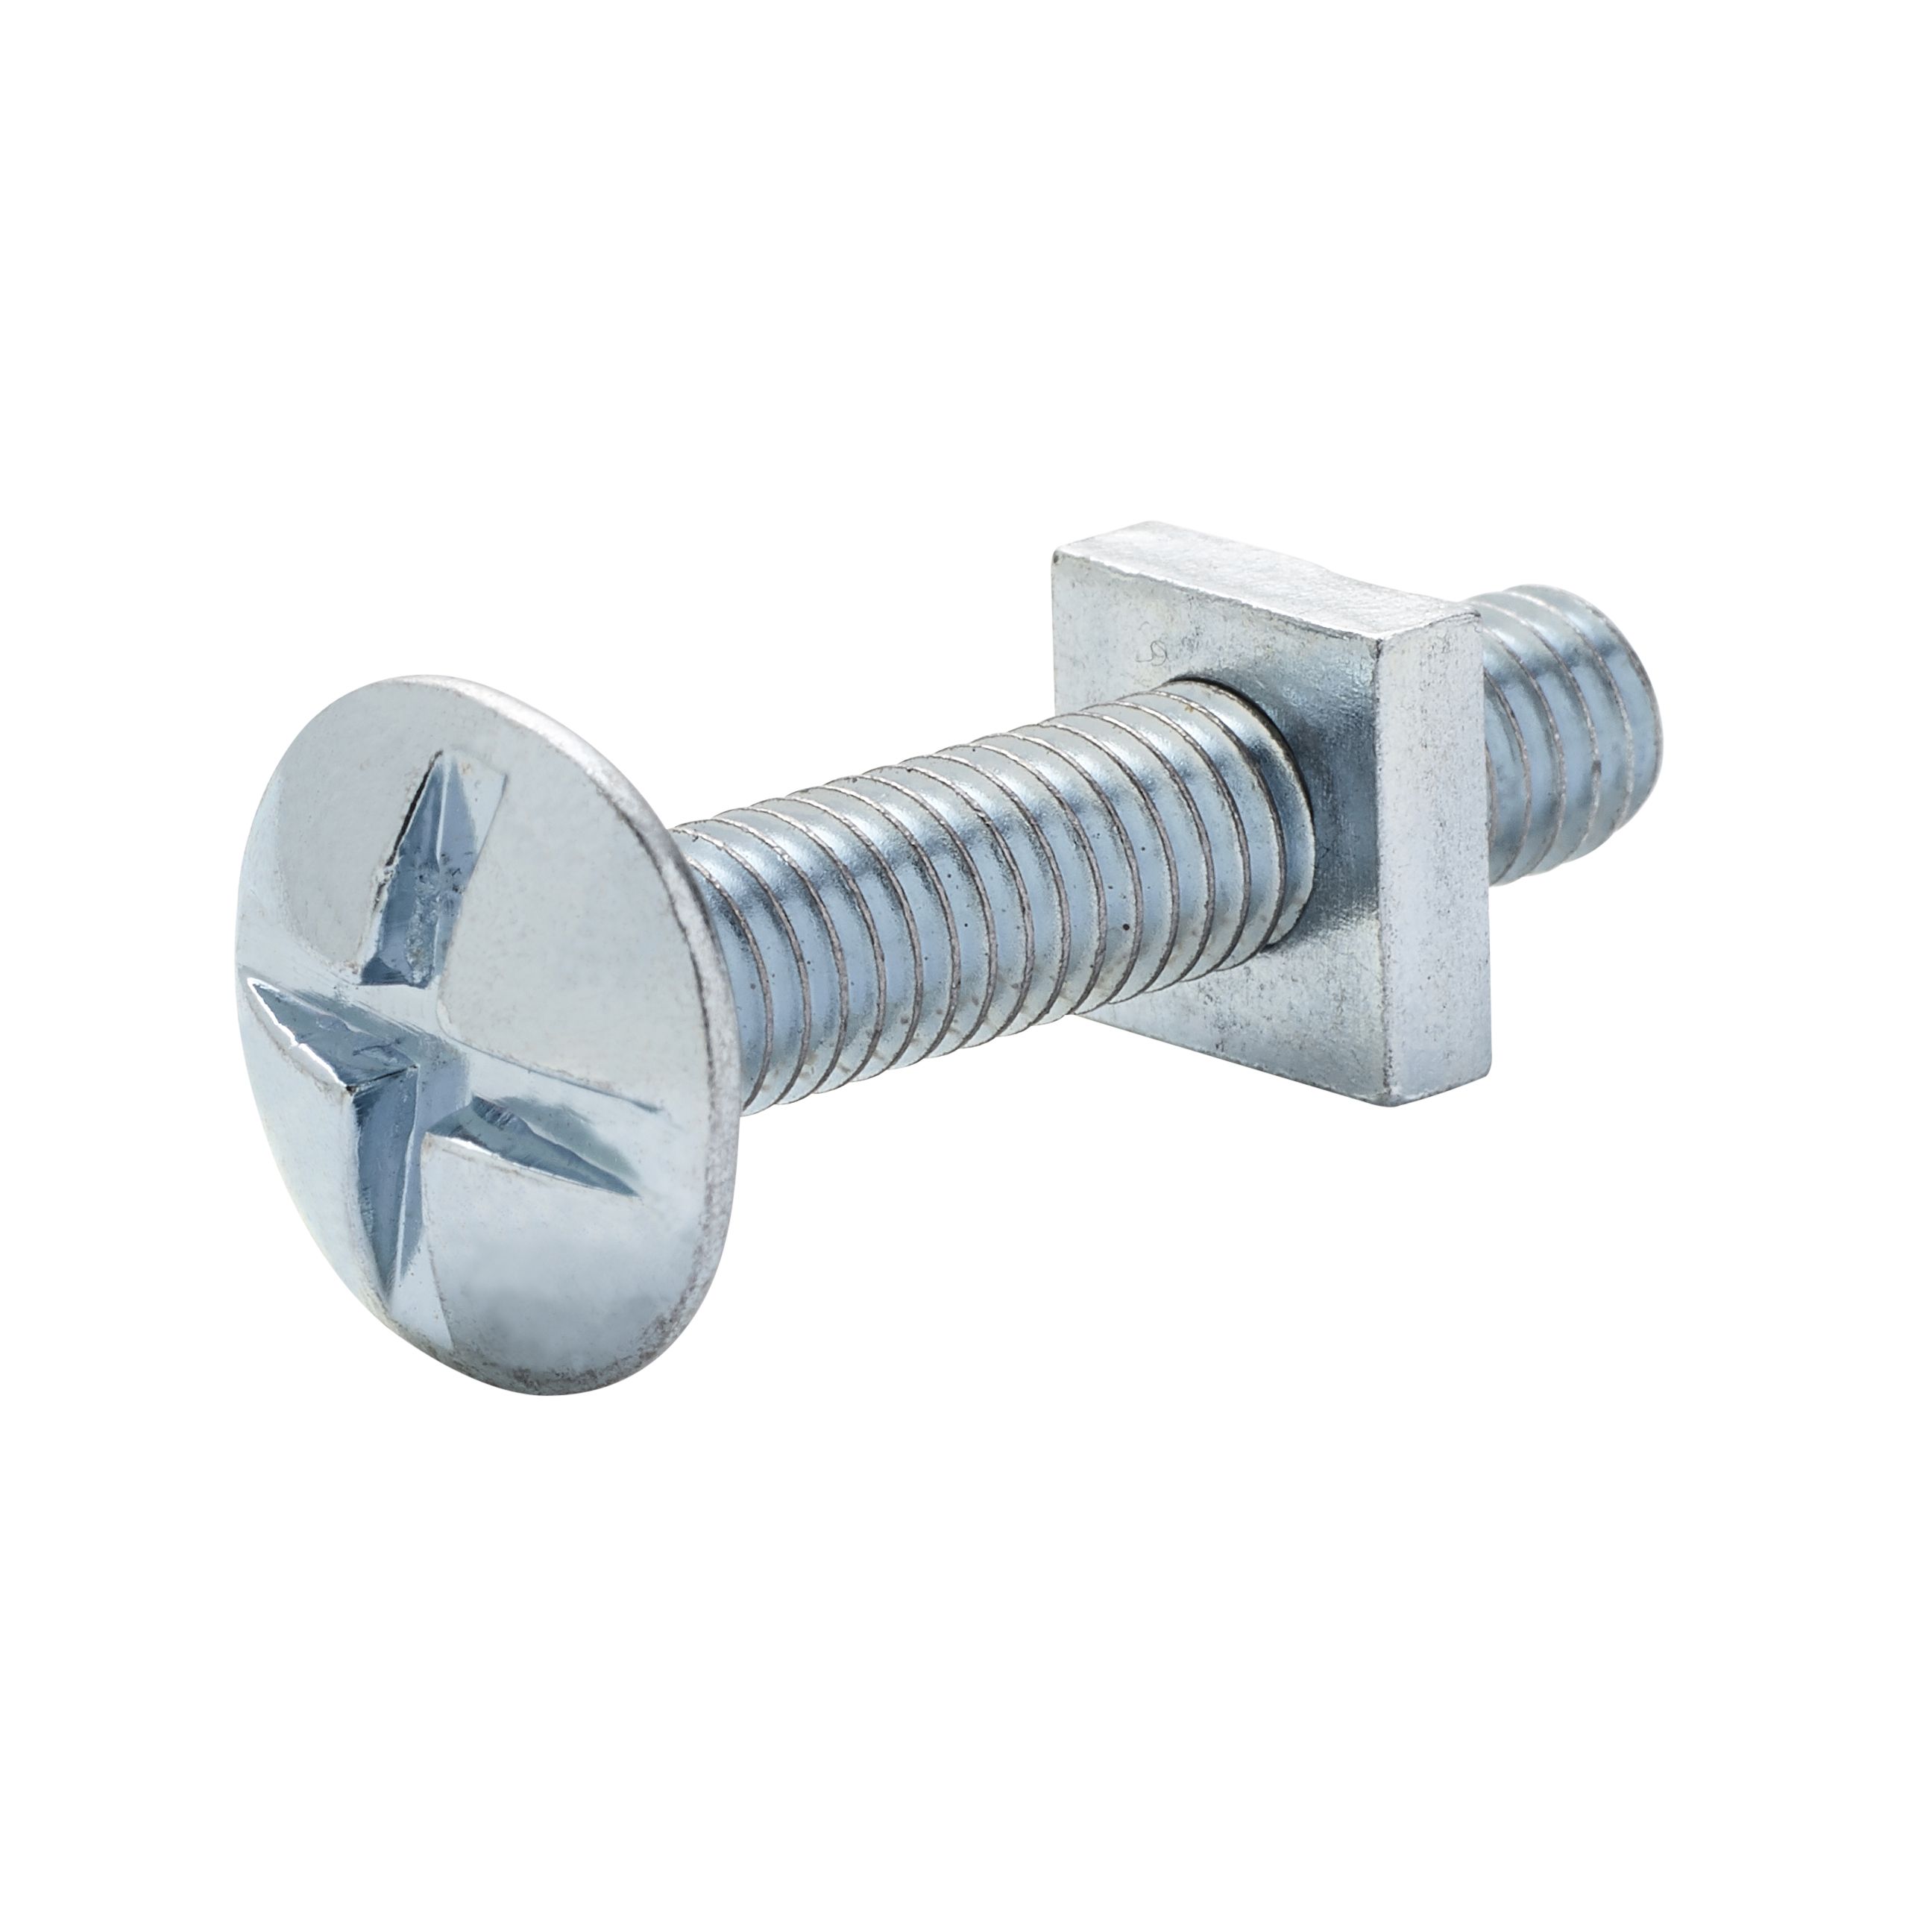 M6 Roofing bolt & nut (L)30mm, Pack of 10